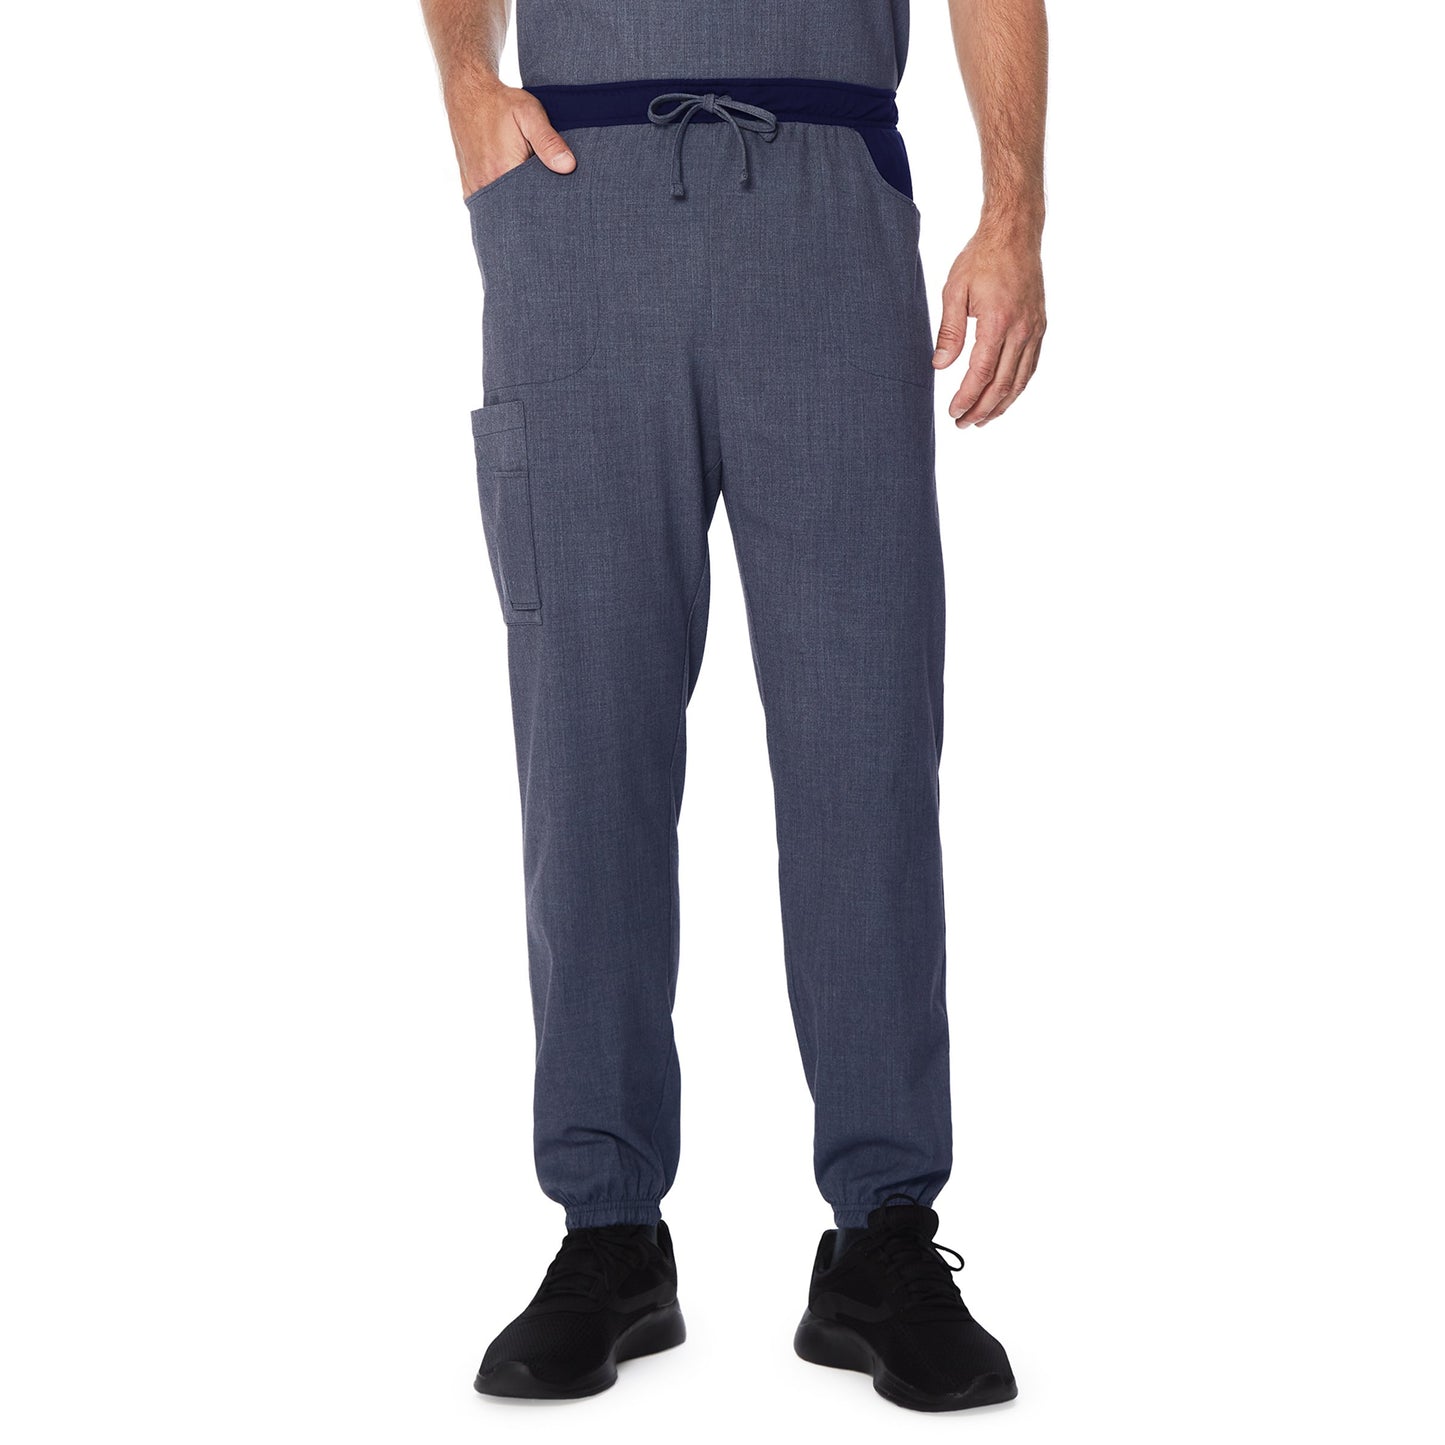 Navy Heather;Model is wearing size M. He is 6'2", Waist 32", Inseam 32".@A man wearing a navy heather scrub jogger pant.